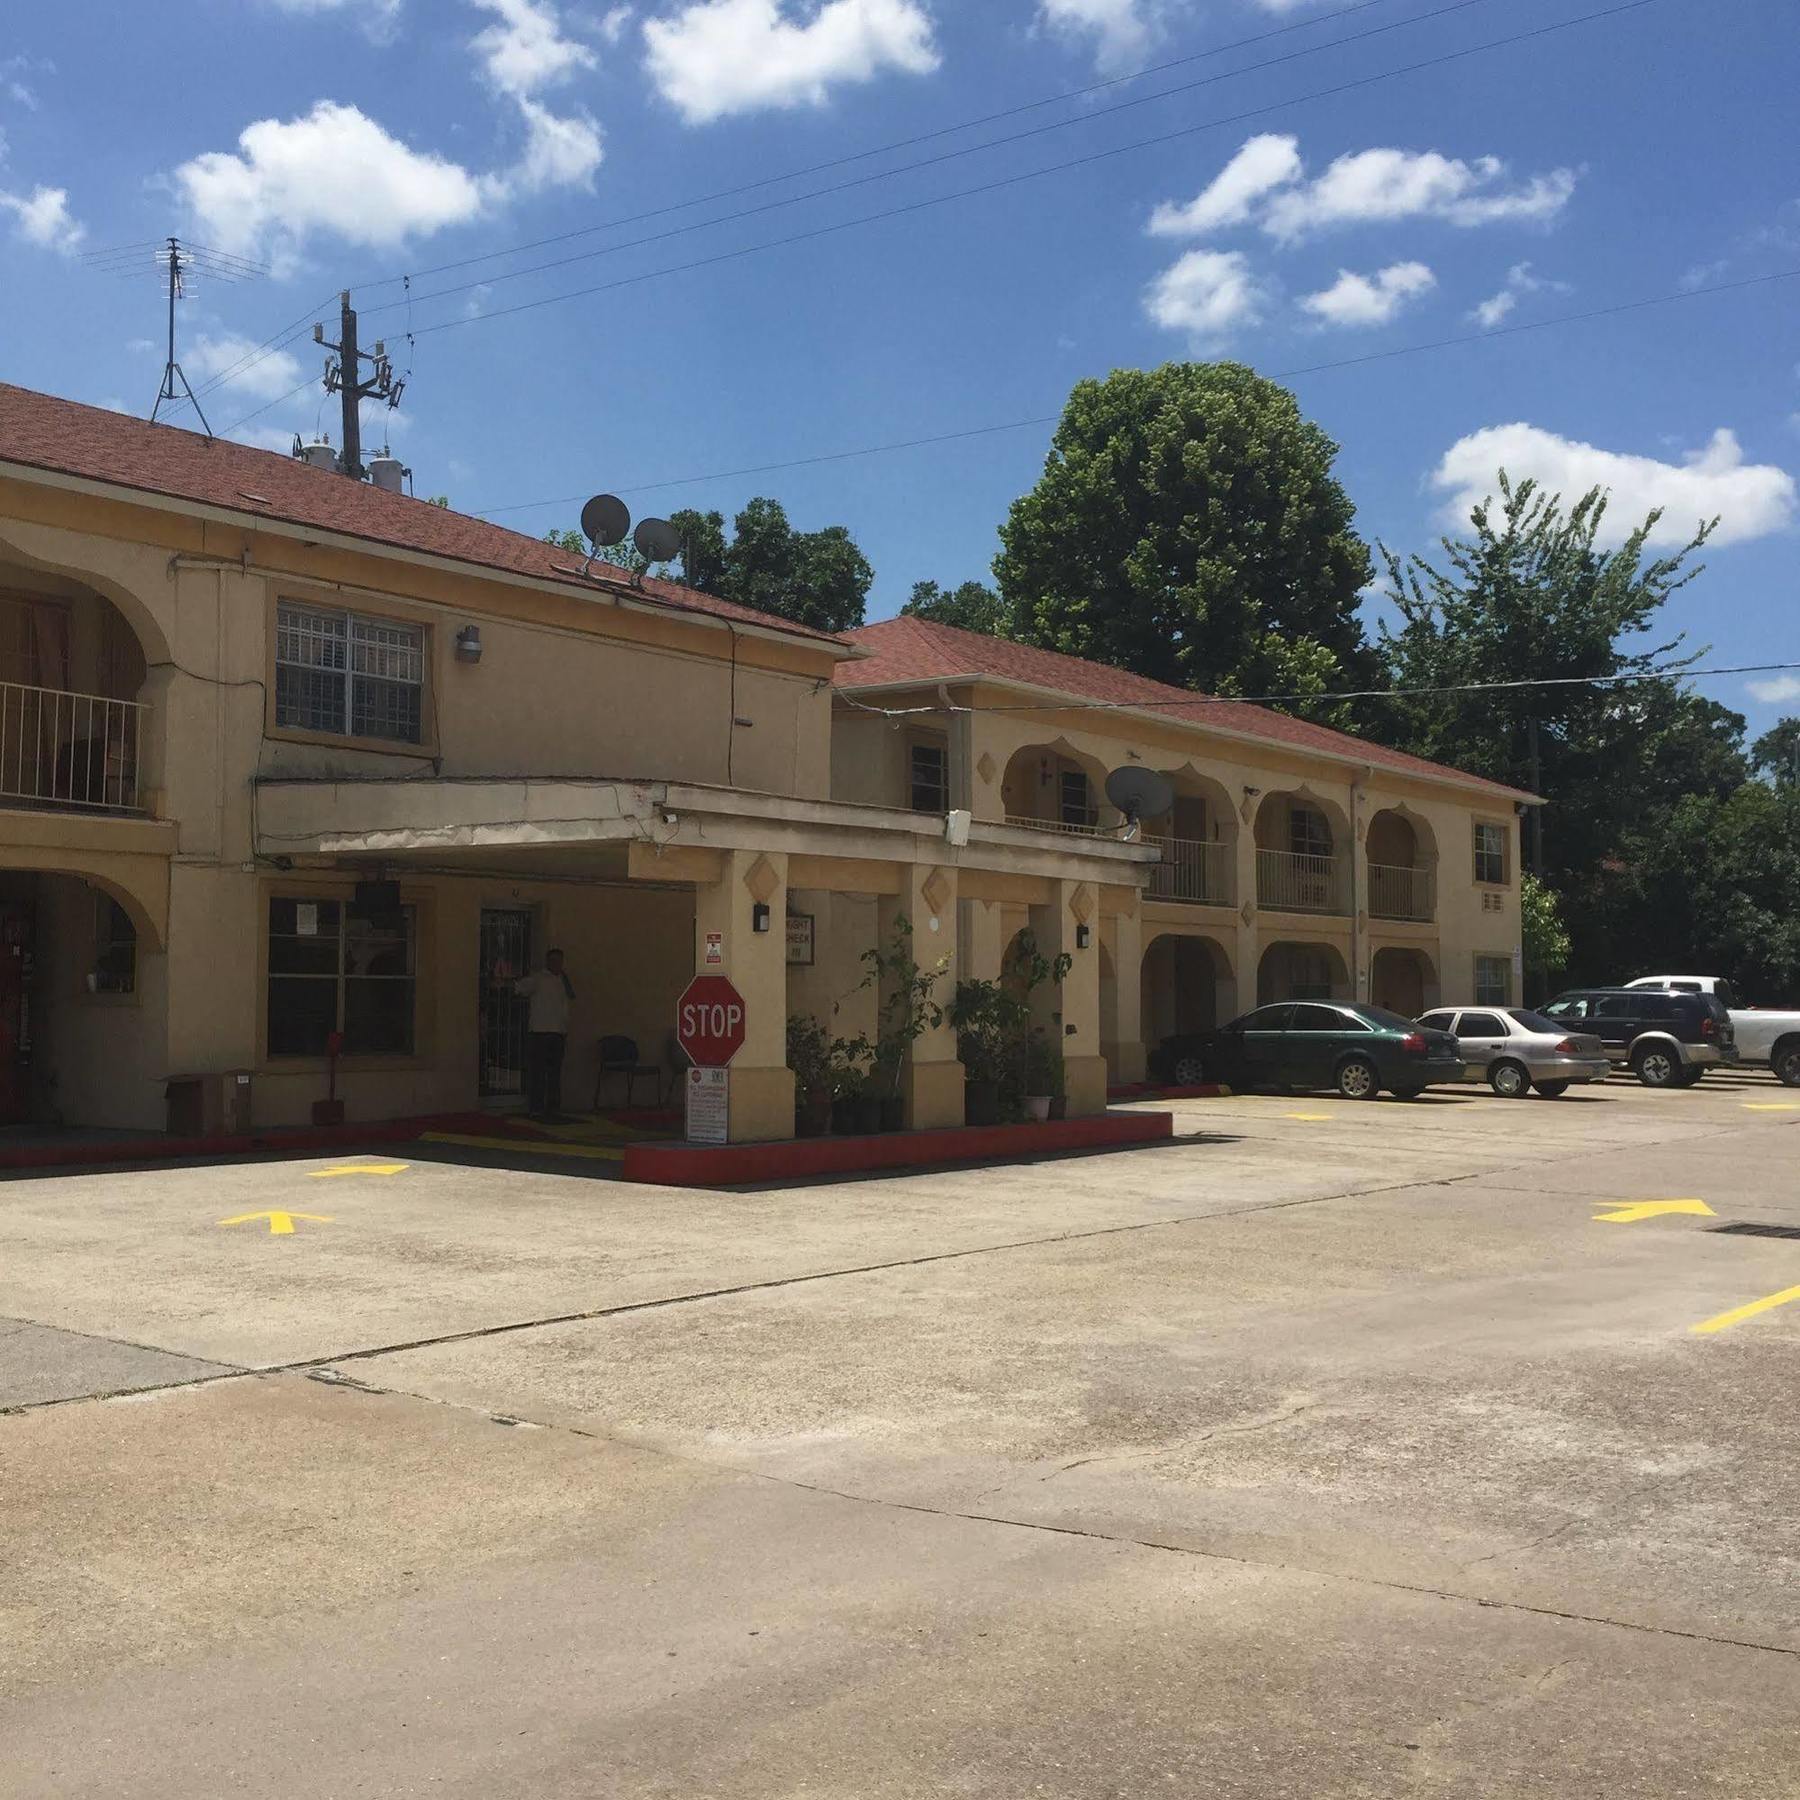 Guest Inn And Suites Houston Exterior photo